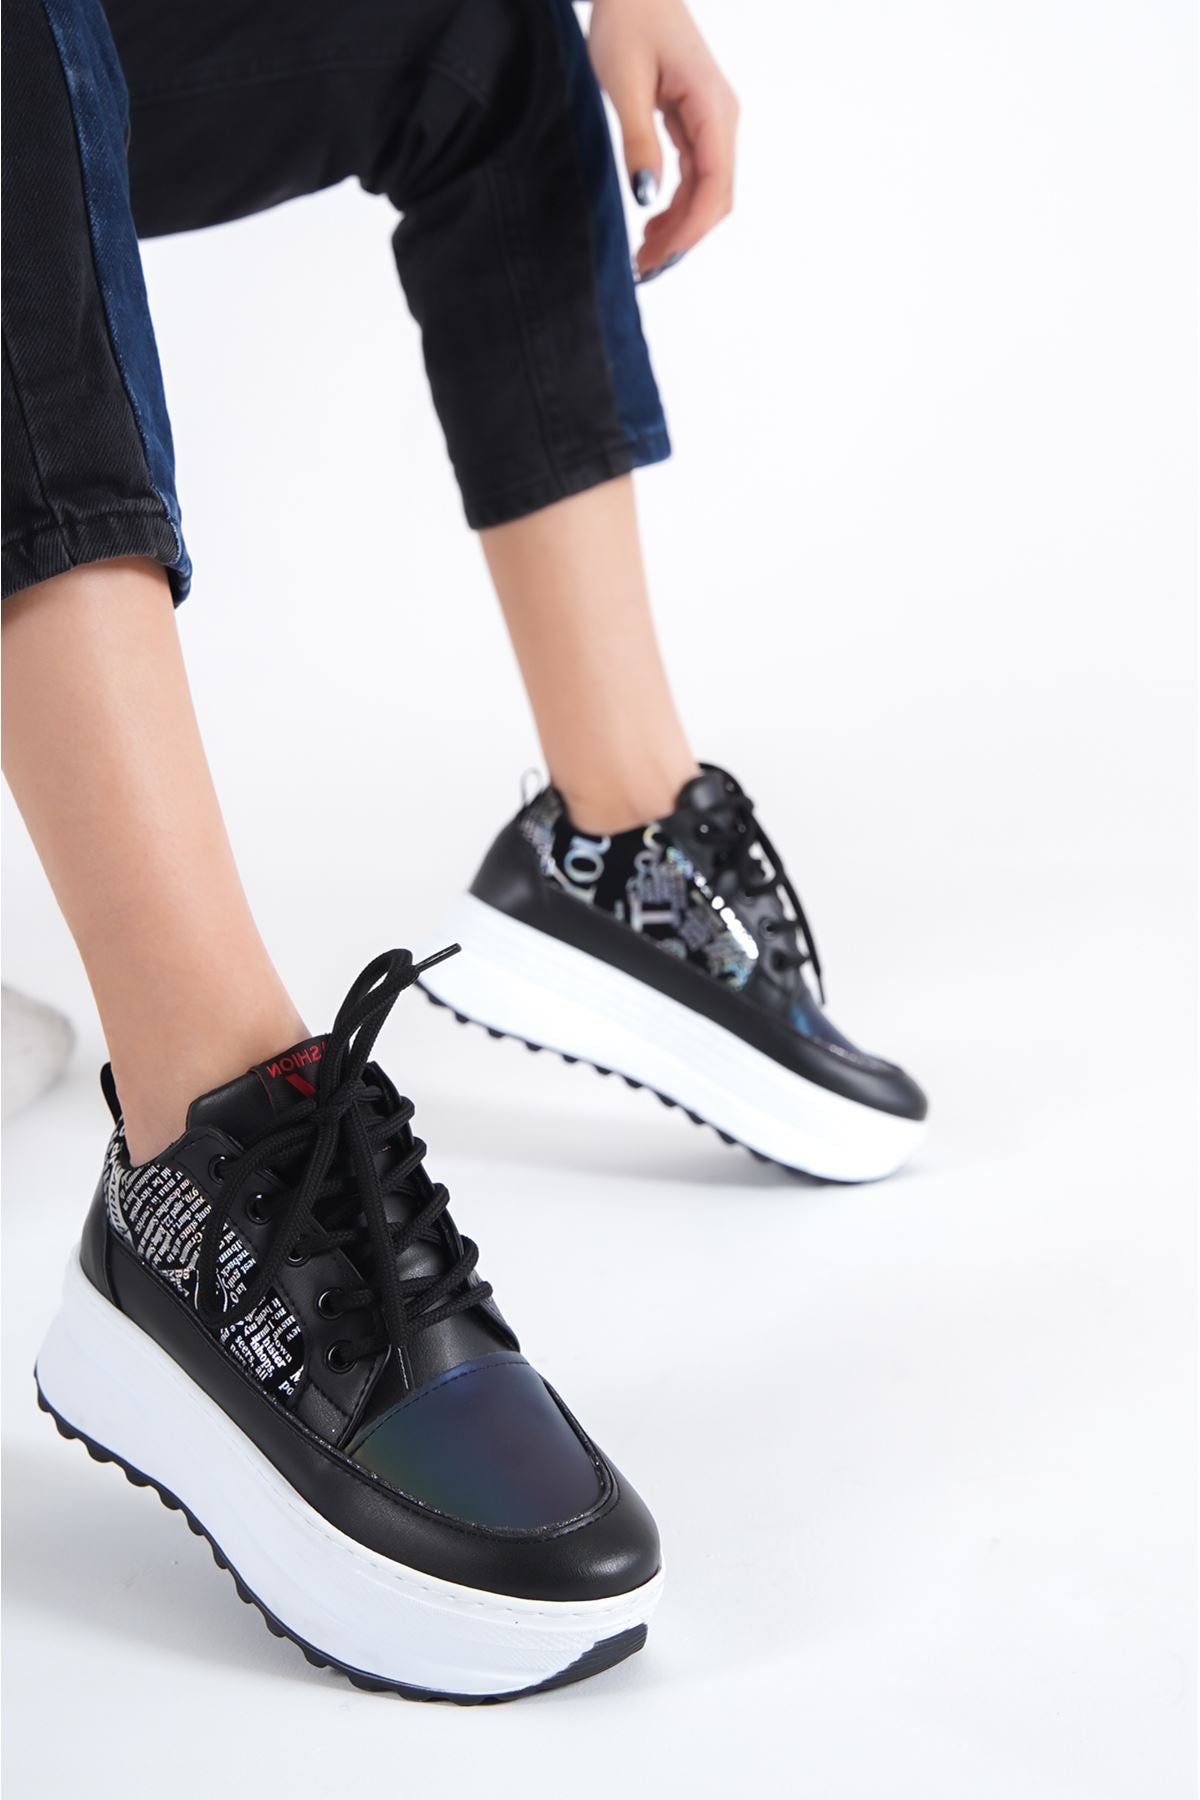 Women's ONEO black-white Sneakers Shoes - STREET MODE ™